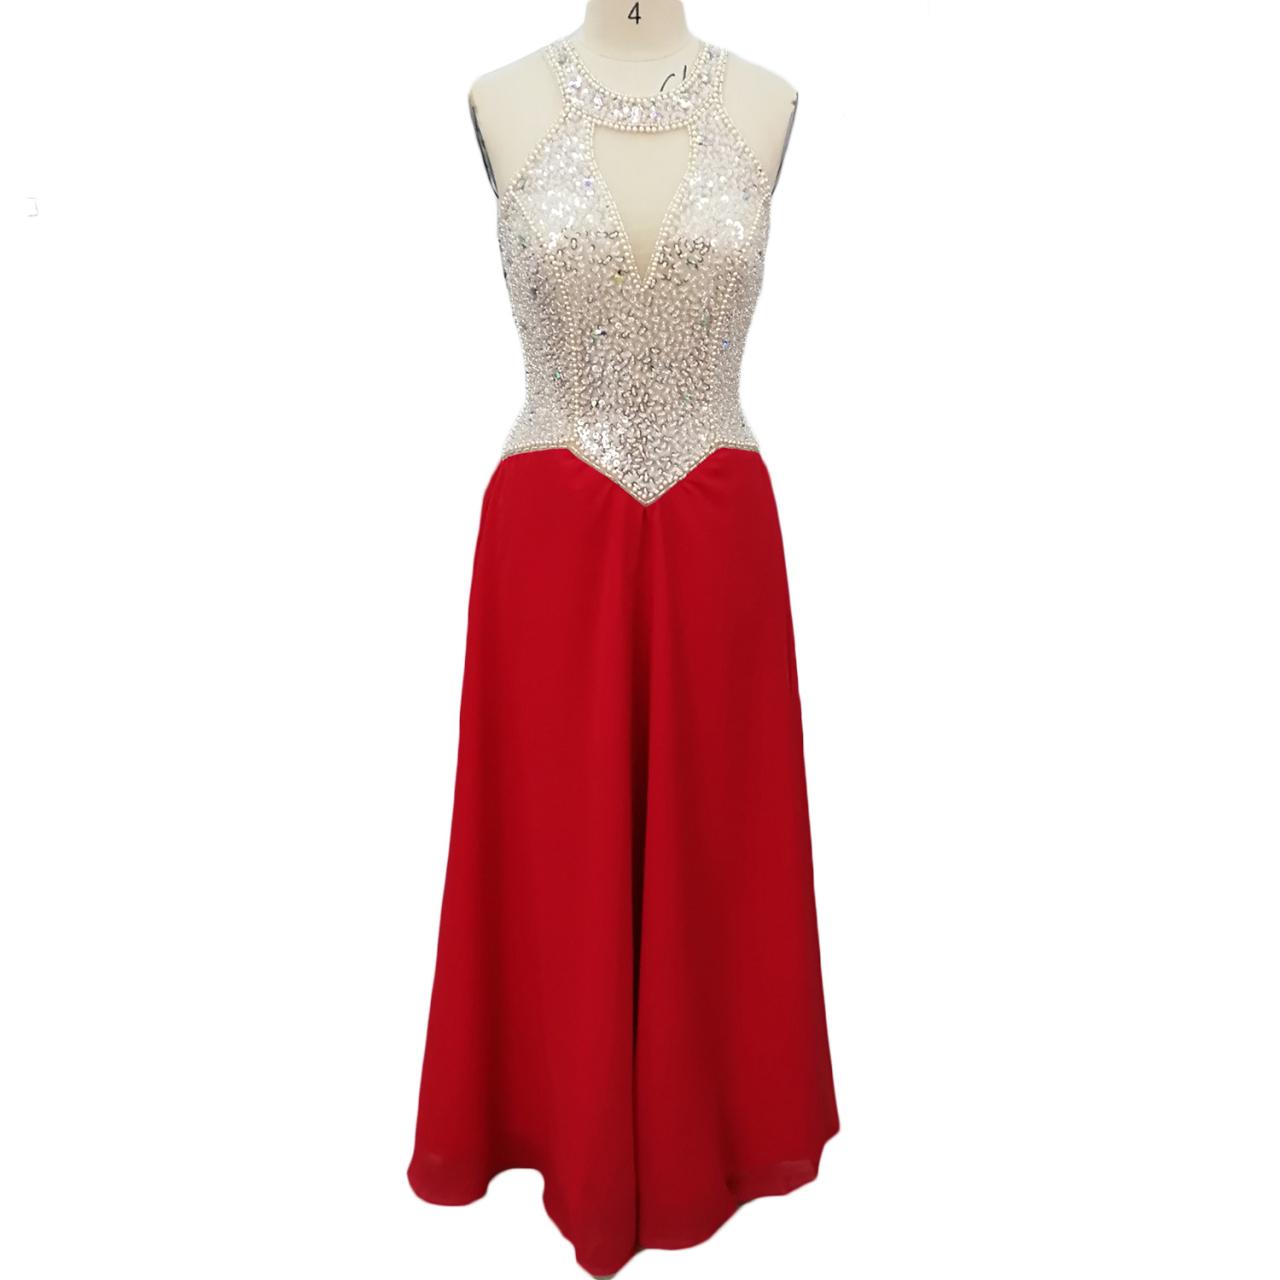 Long Red Chiffon A Line Prom Dresses With Beaded Bodice And Keyhole Neck